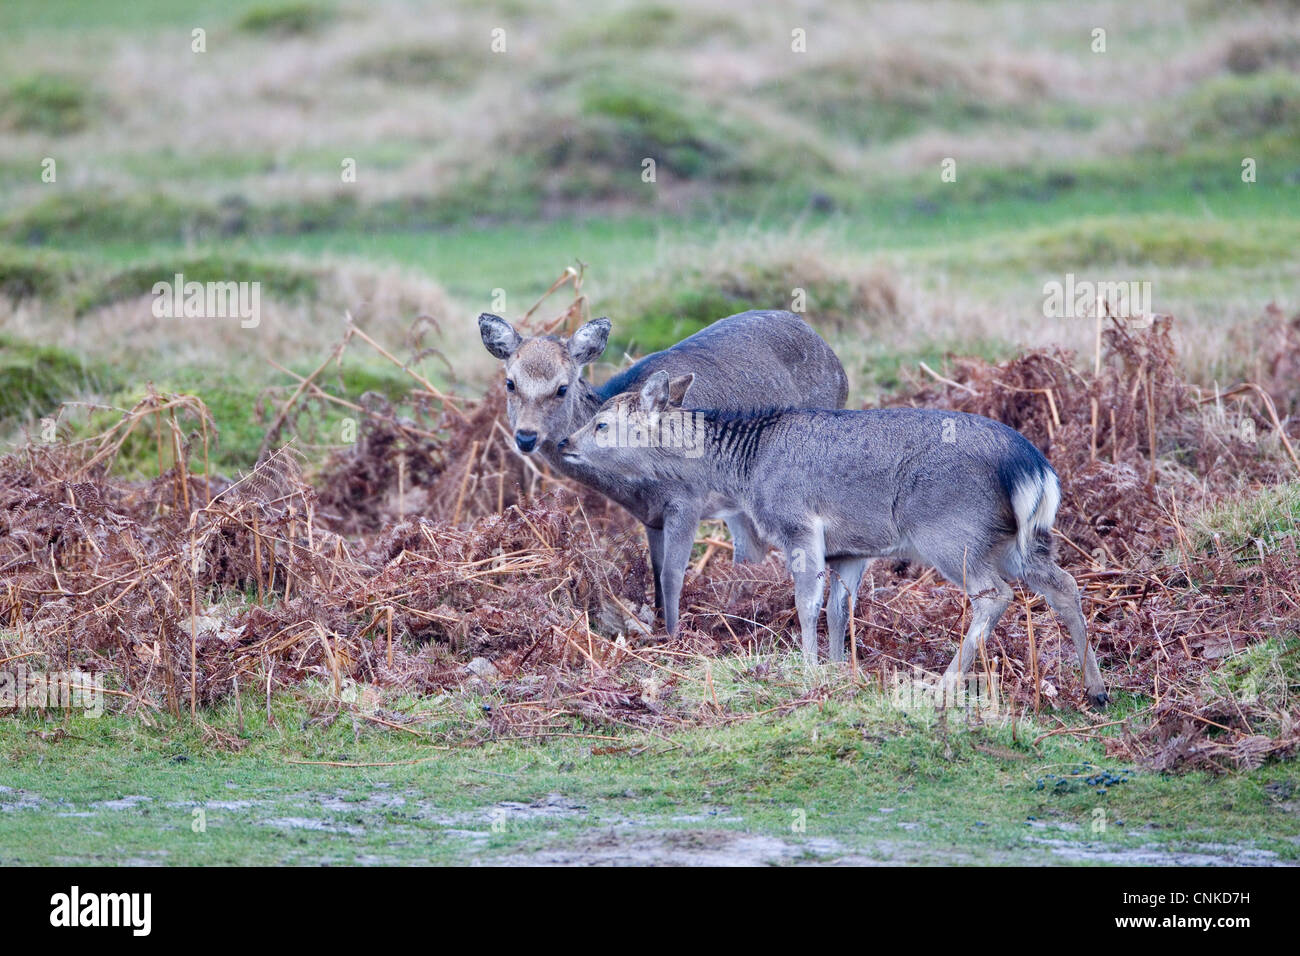 Sika Deer (Cervus nippon) introduced species, doe with fawn, interacting, Knole Park, Kent, England, february Stock Photo